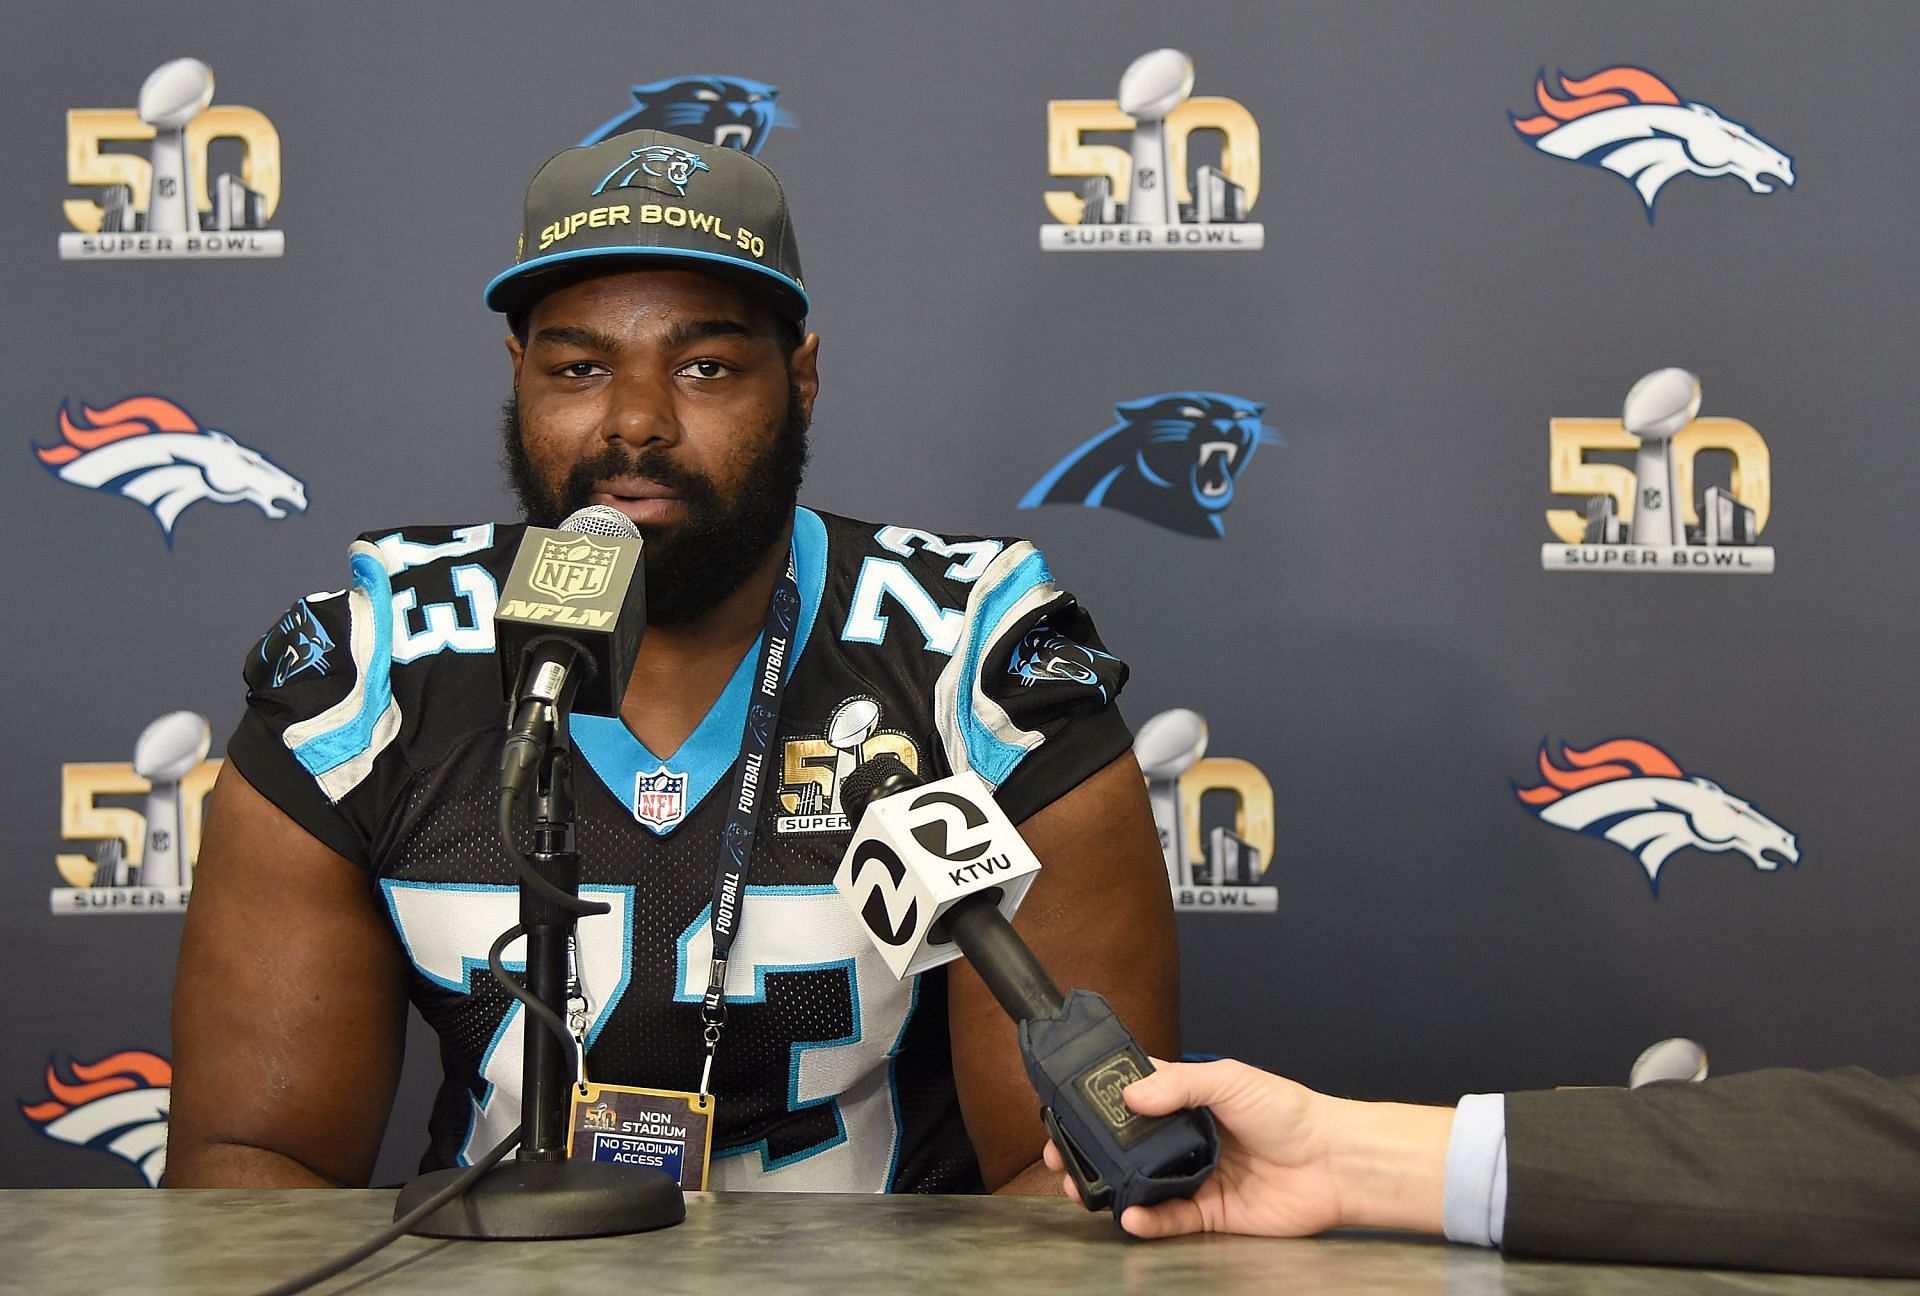 Michael Oher retired with the Carolina Panthers in 2017